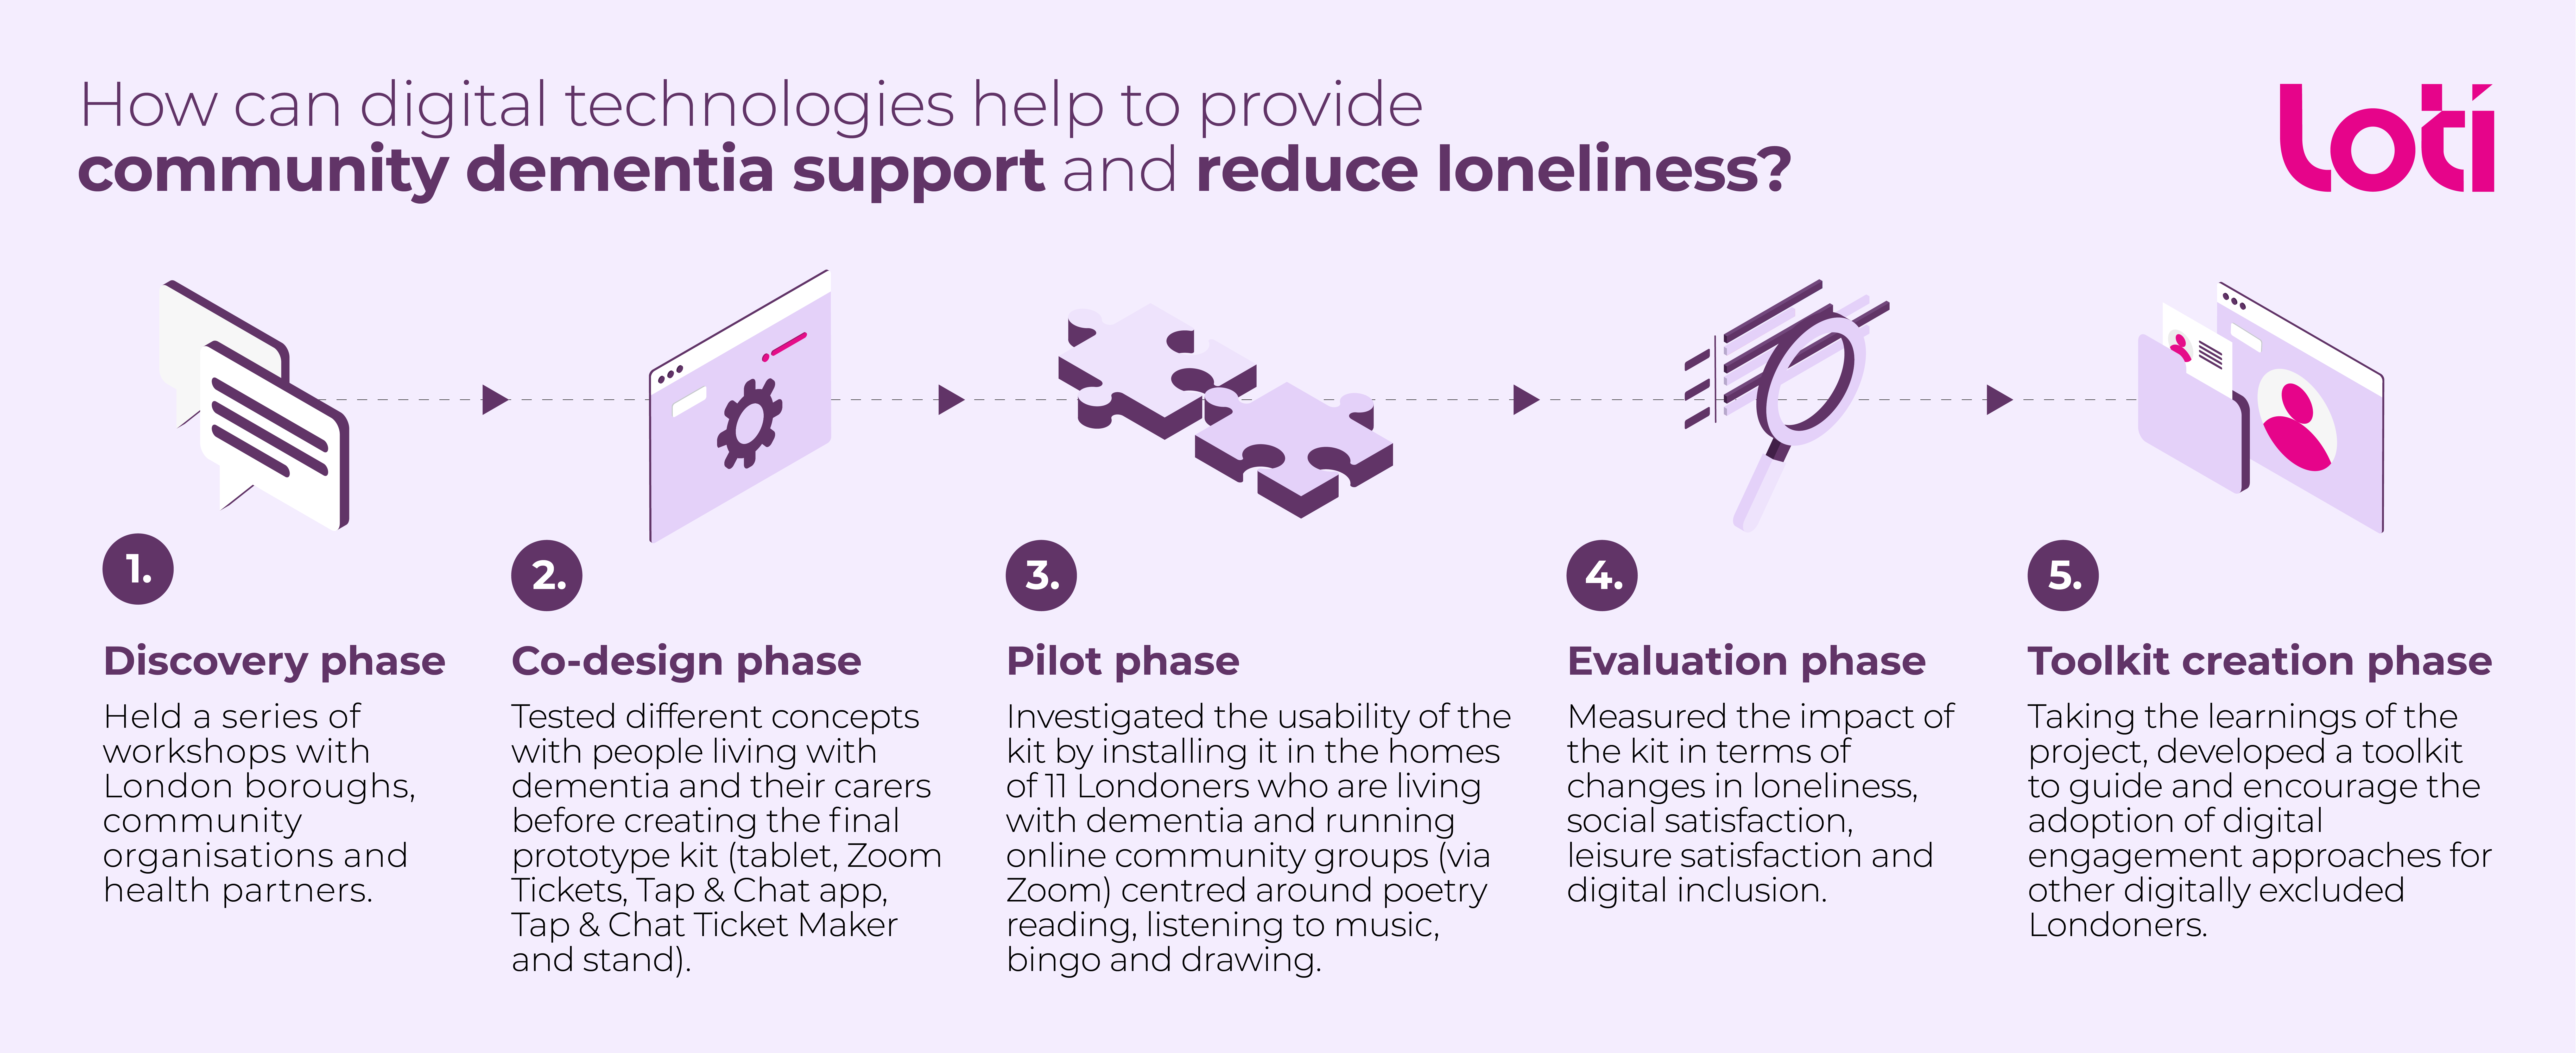 An infographic highlighting the various phases required to answer the question: How can digital technologies help to provide community dementia support and reduce loneliness? The phases include discovery phase, co-design phase, pilot phase, evaluation phase, toolkit creation phase